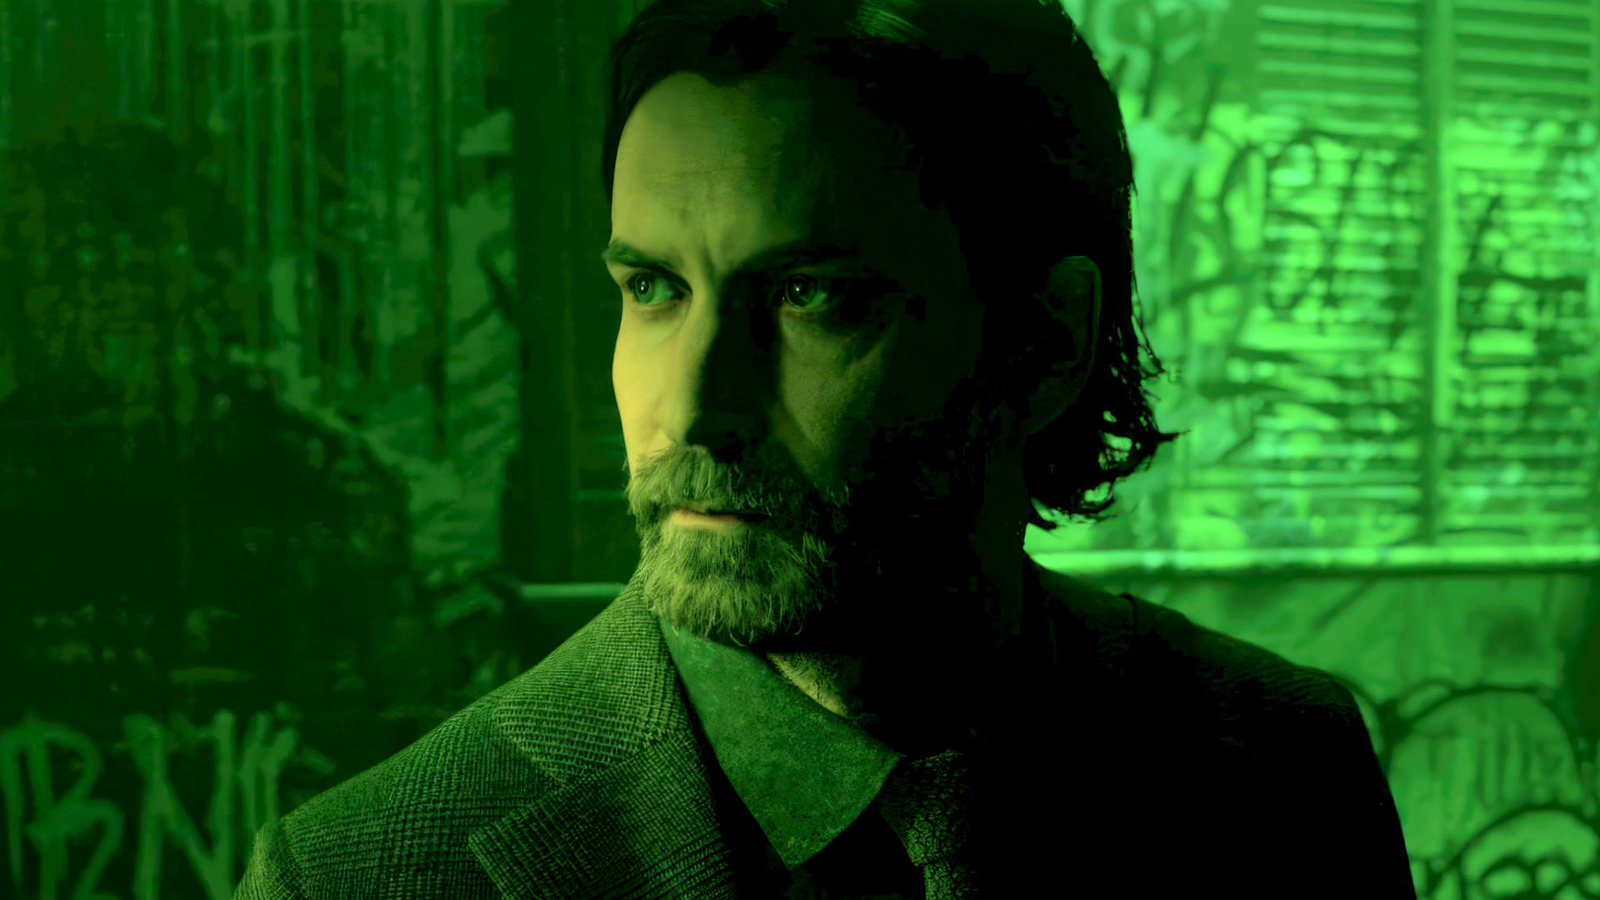 Alan Wake 2 feels like Remedy's attempt to combine the best games it's ever  made